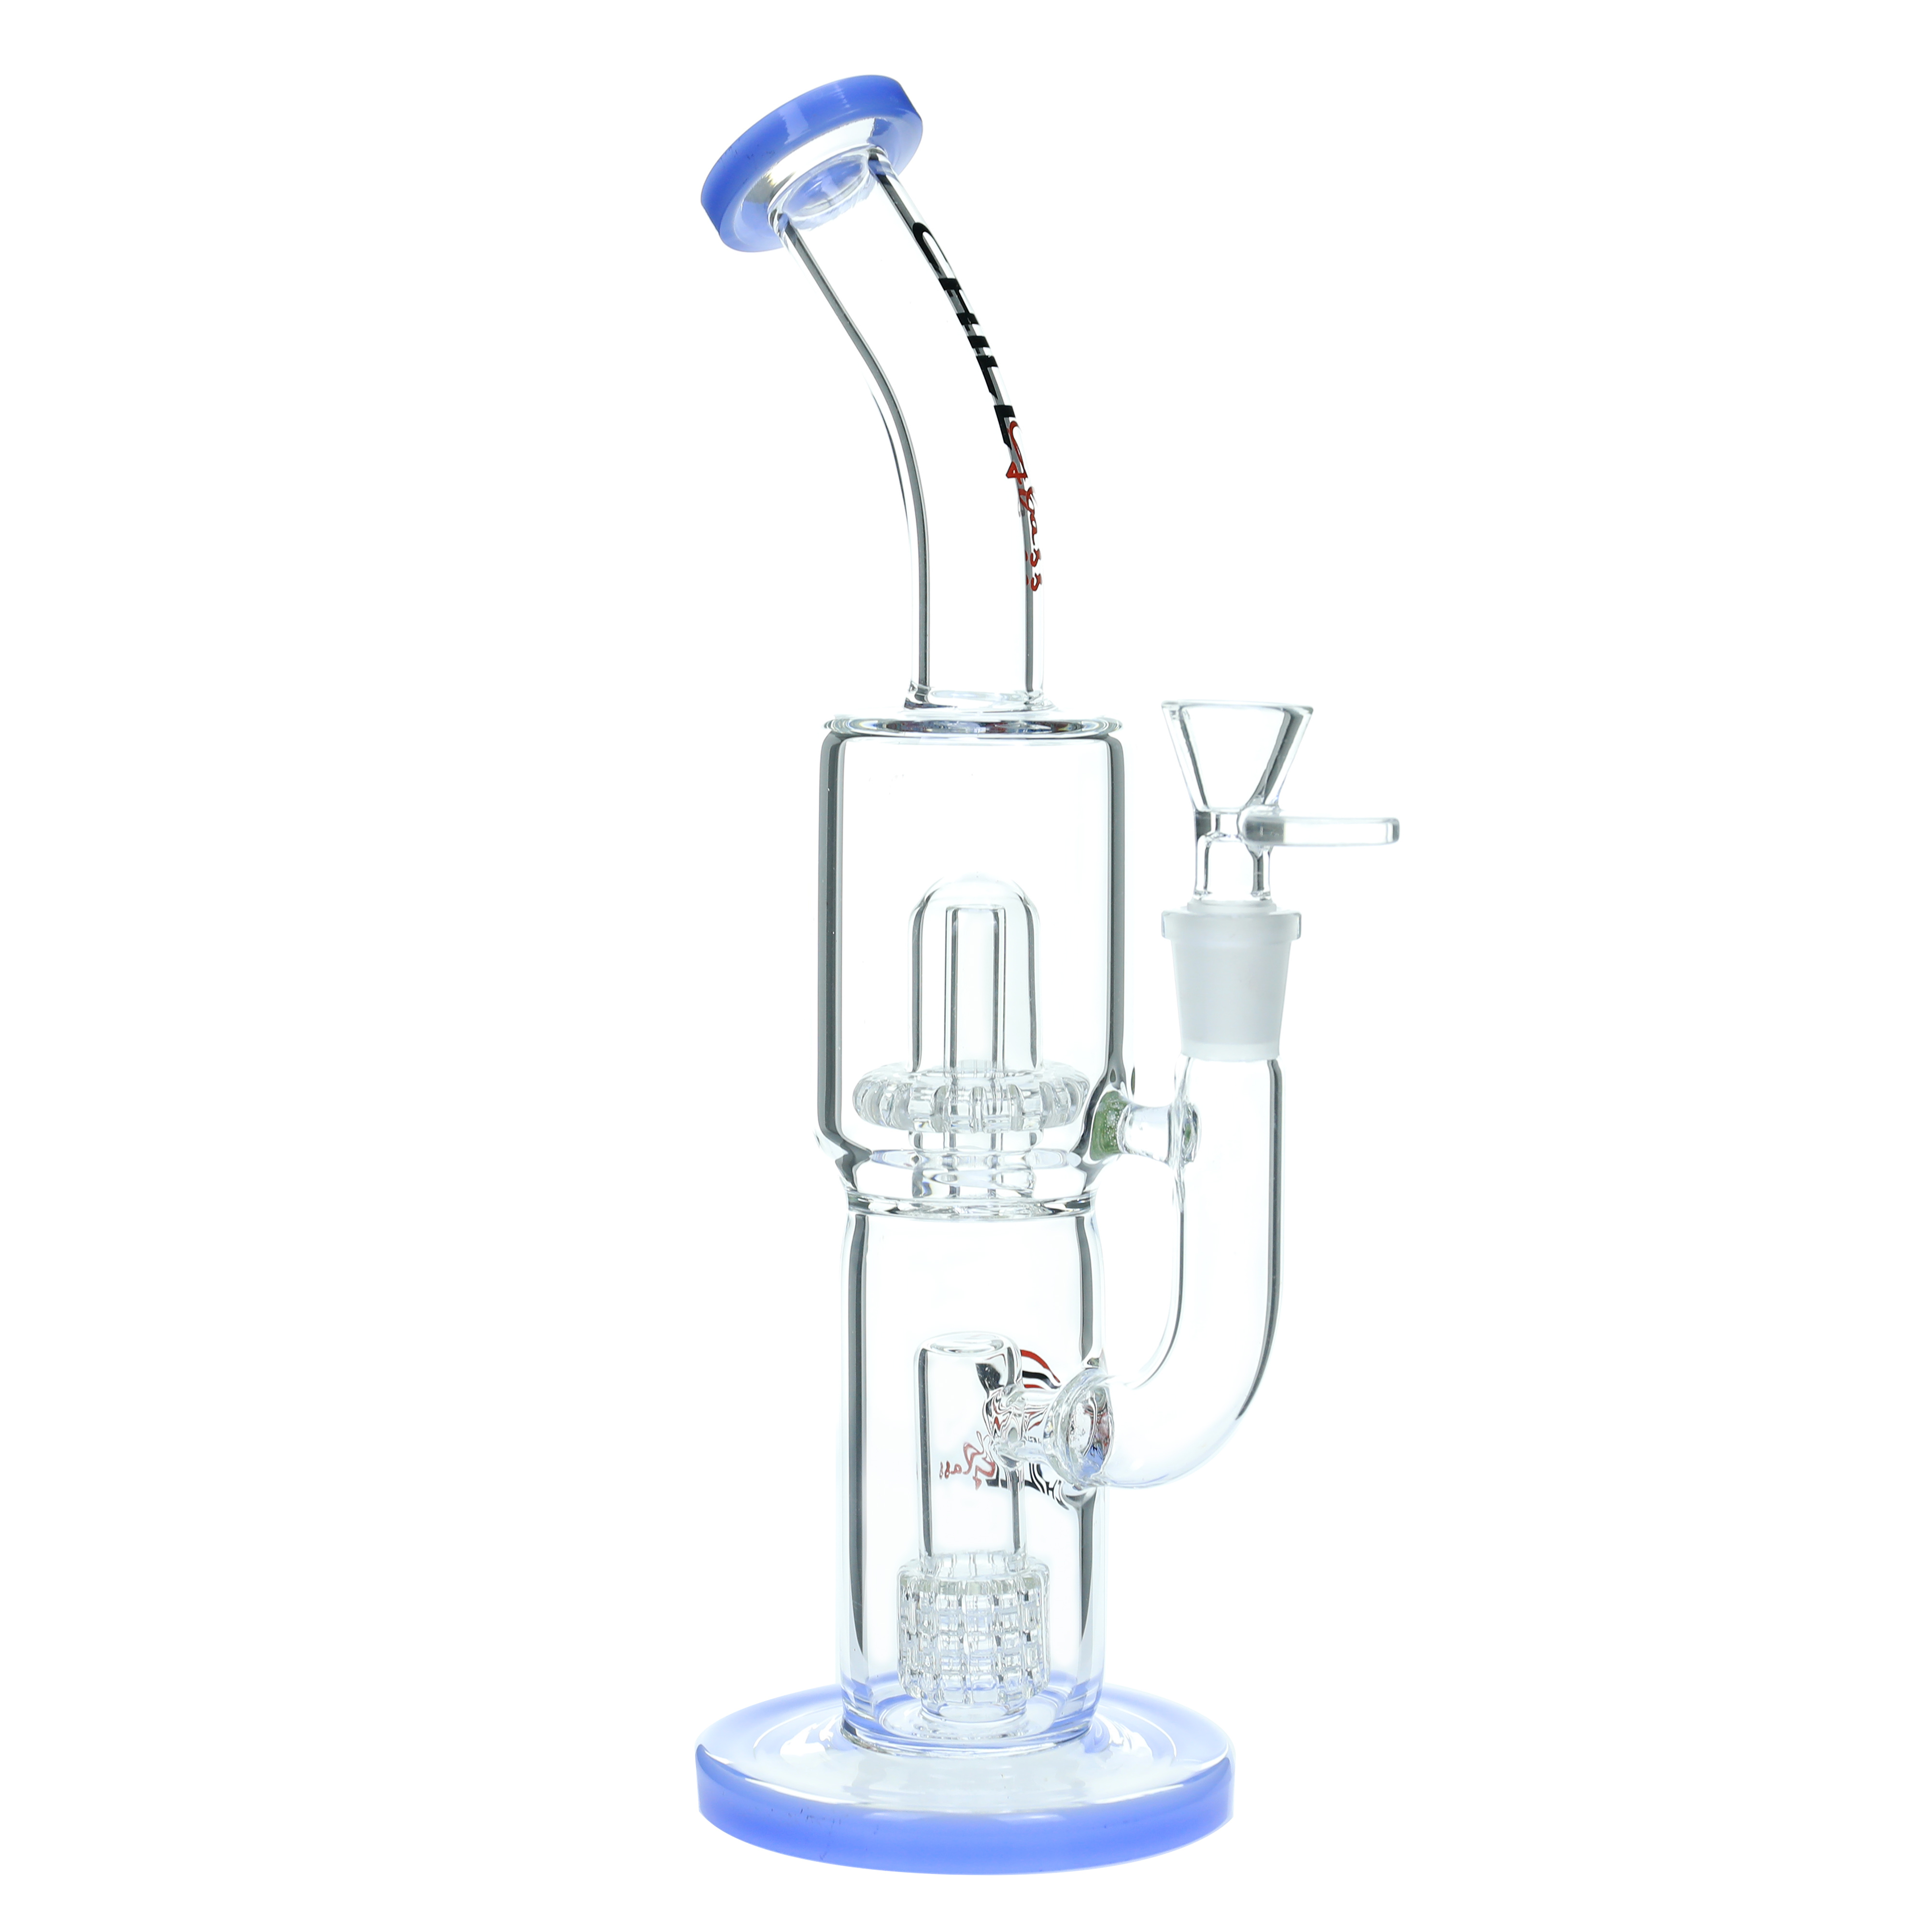 Chill-Glass-Water-Pipe-JLC-08